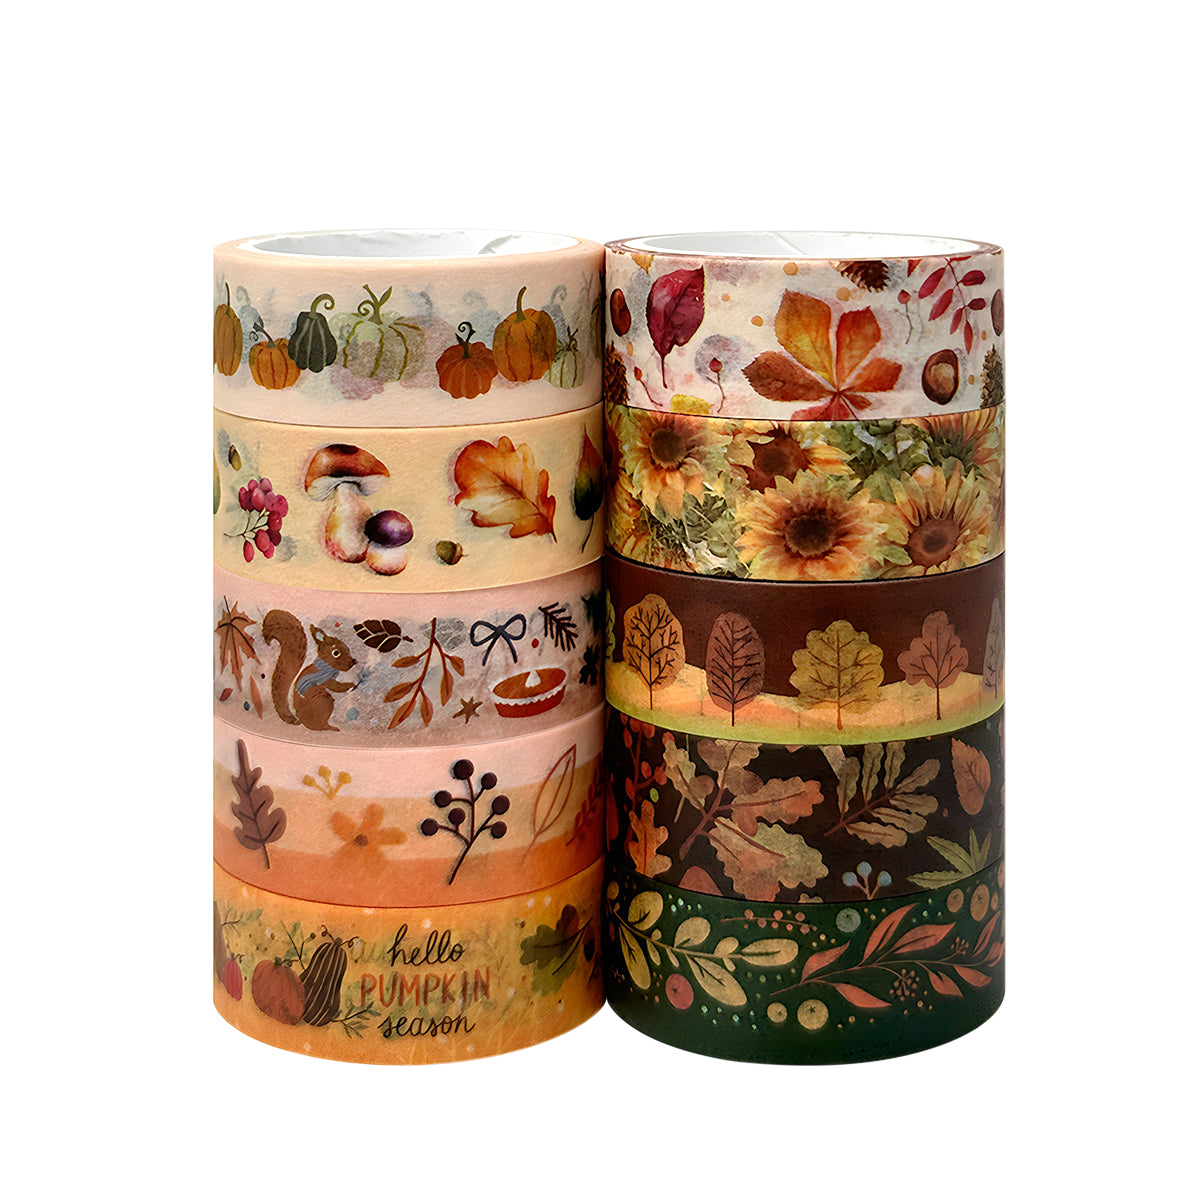 Wrapables 3 Rolls Decorative Washi Tape Stickers for Scrapbooking, Stationery, Diary, Card Making (300 Pcs) Mushrooms, Bunnies, Autumn